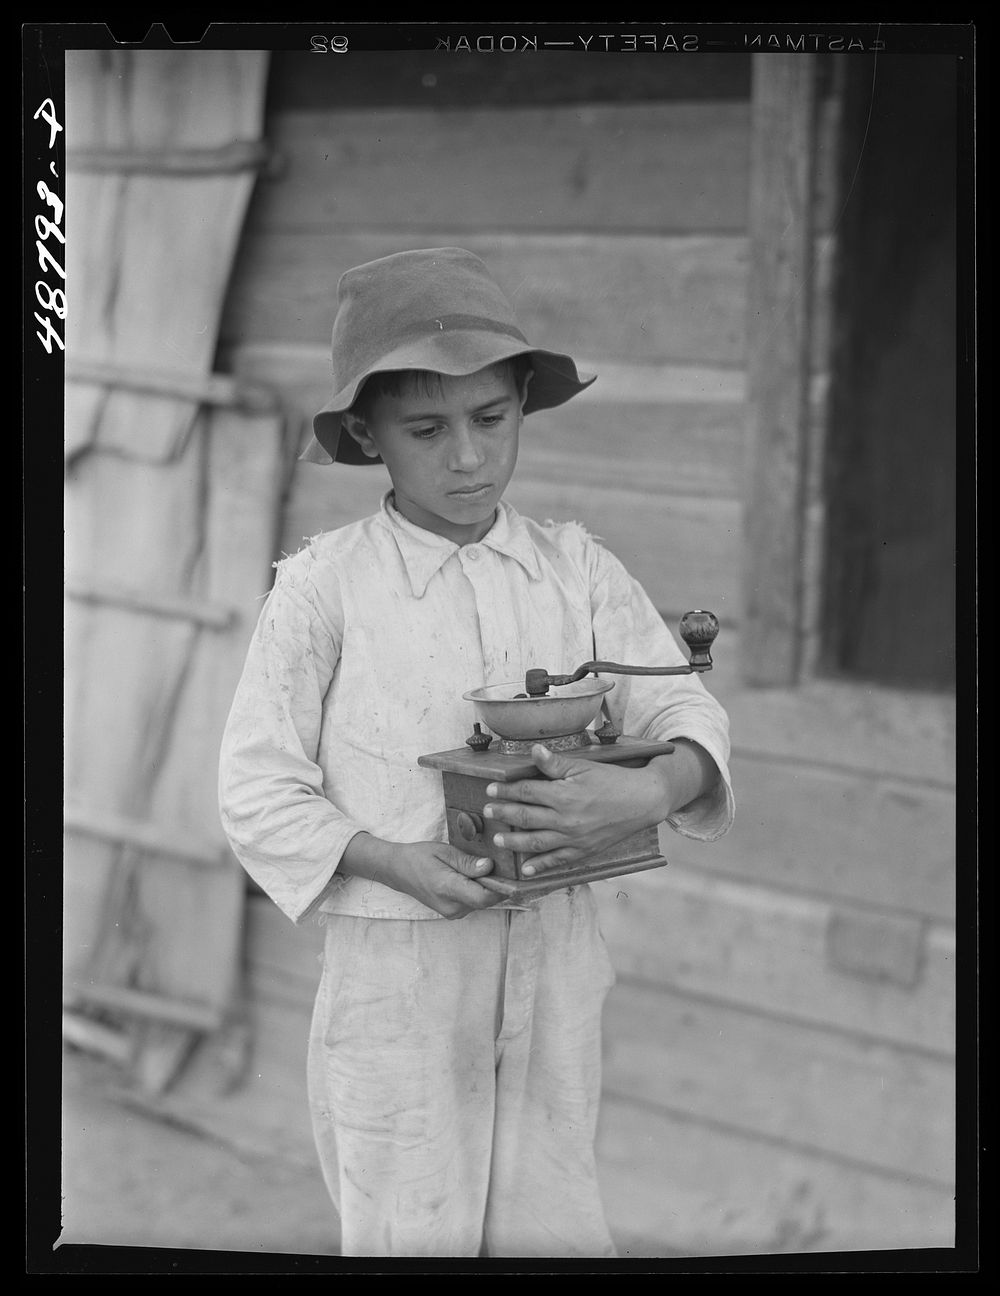 [Untitled photo, possibly related to: Caguas, Puerto Rico (vicinity). Son of a farmer]. Sourced from the Library of Congress.